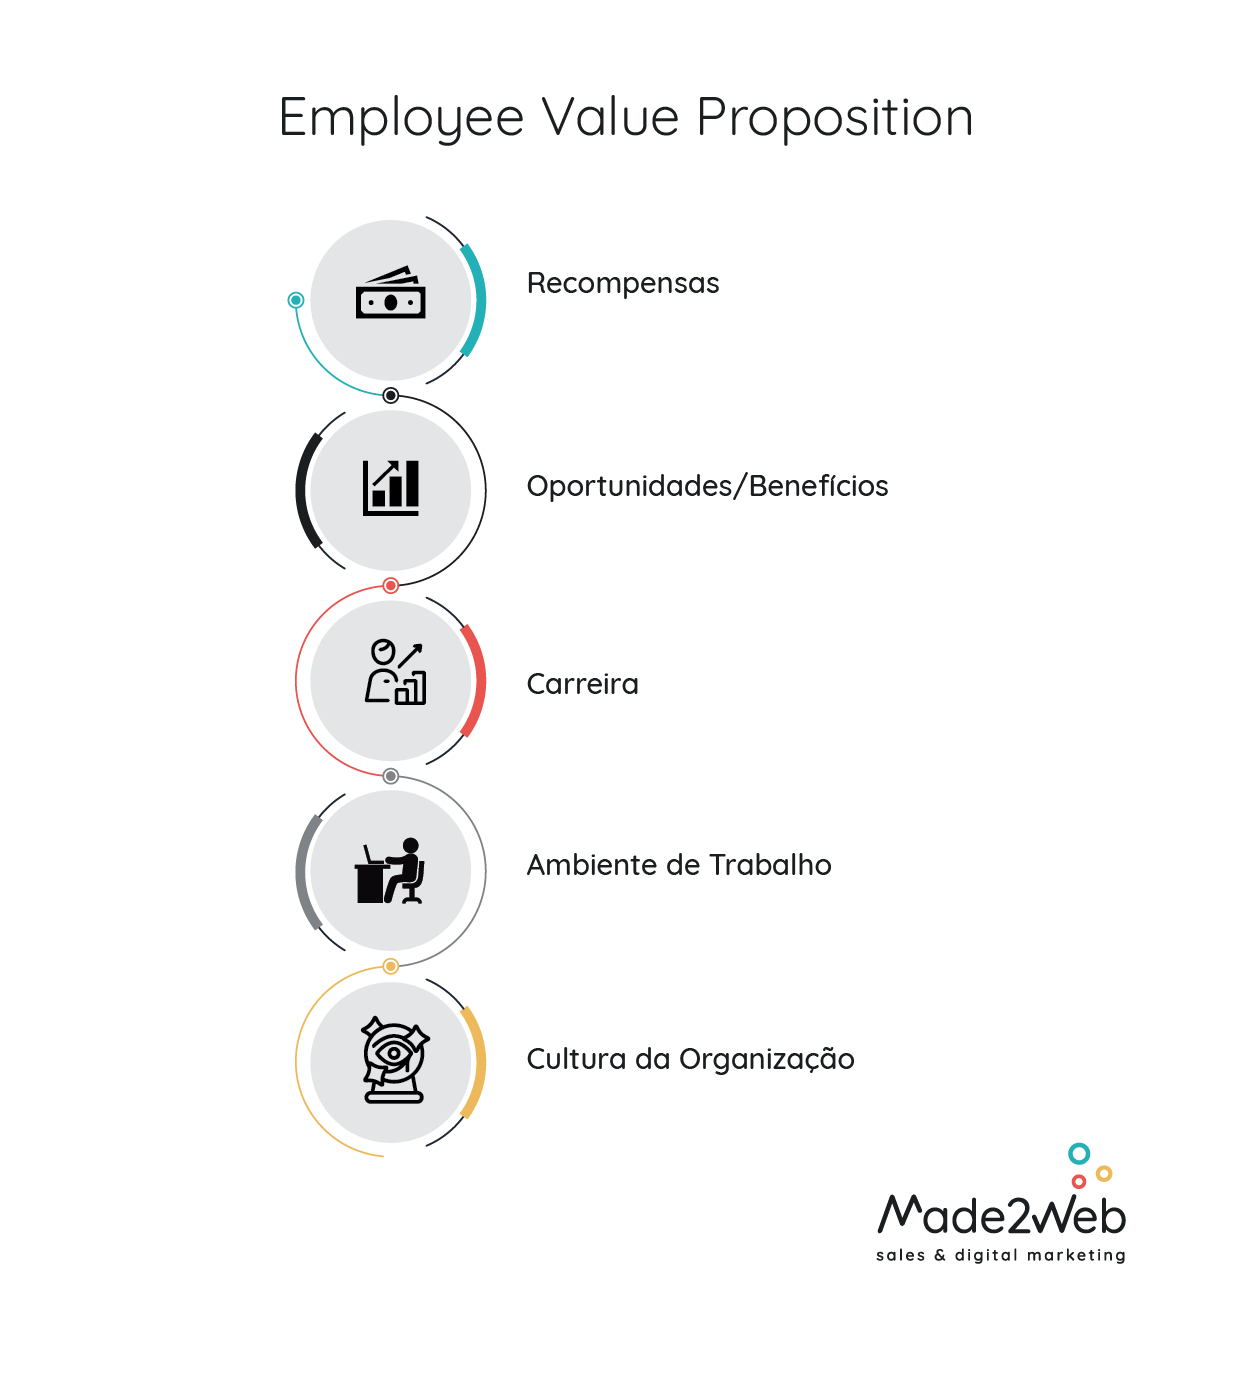 employee-value-proposition-info-made2web